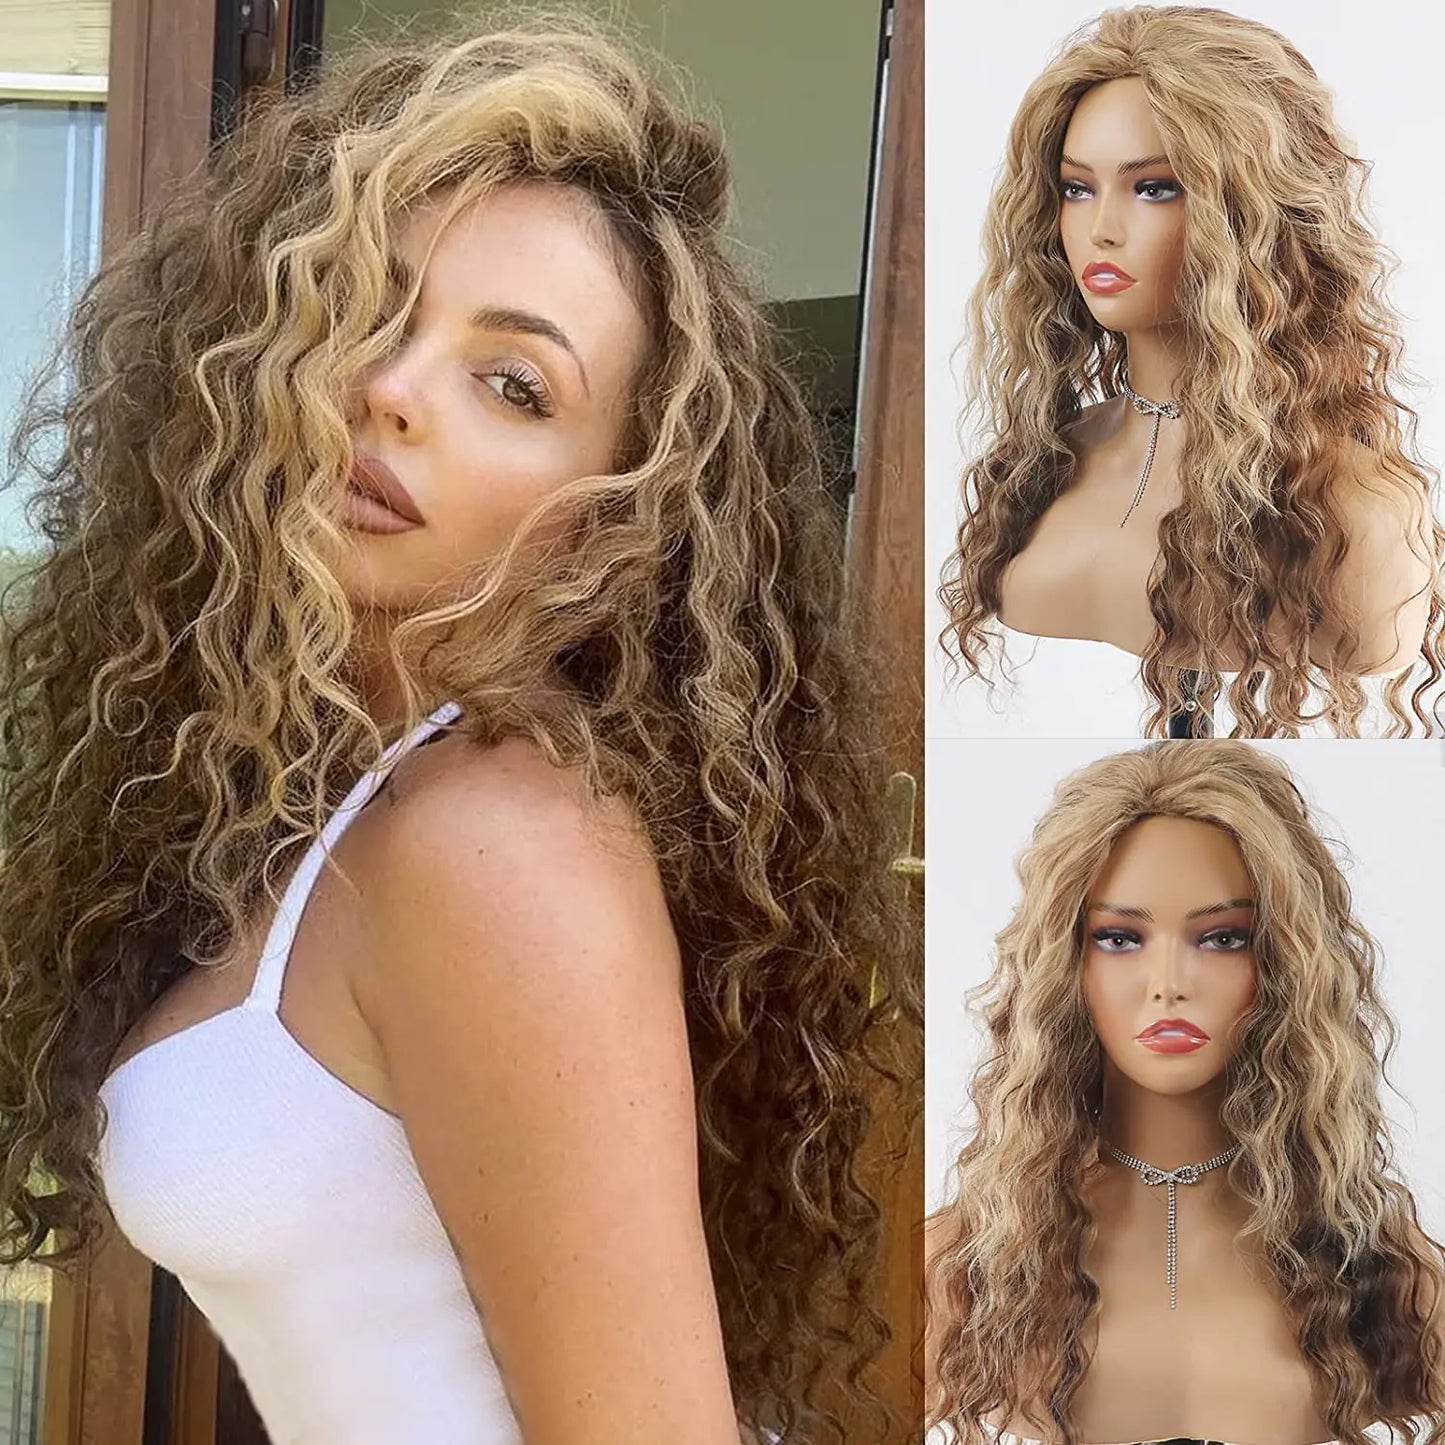 Radiant Wig with Curls